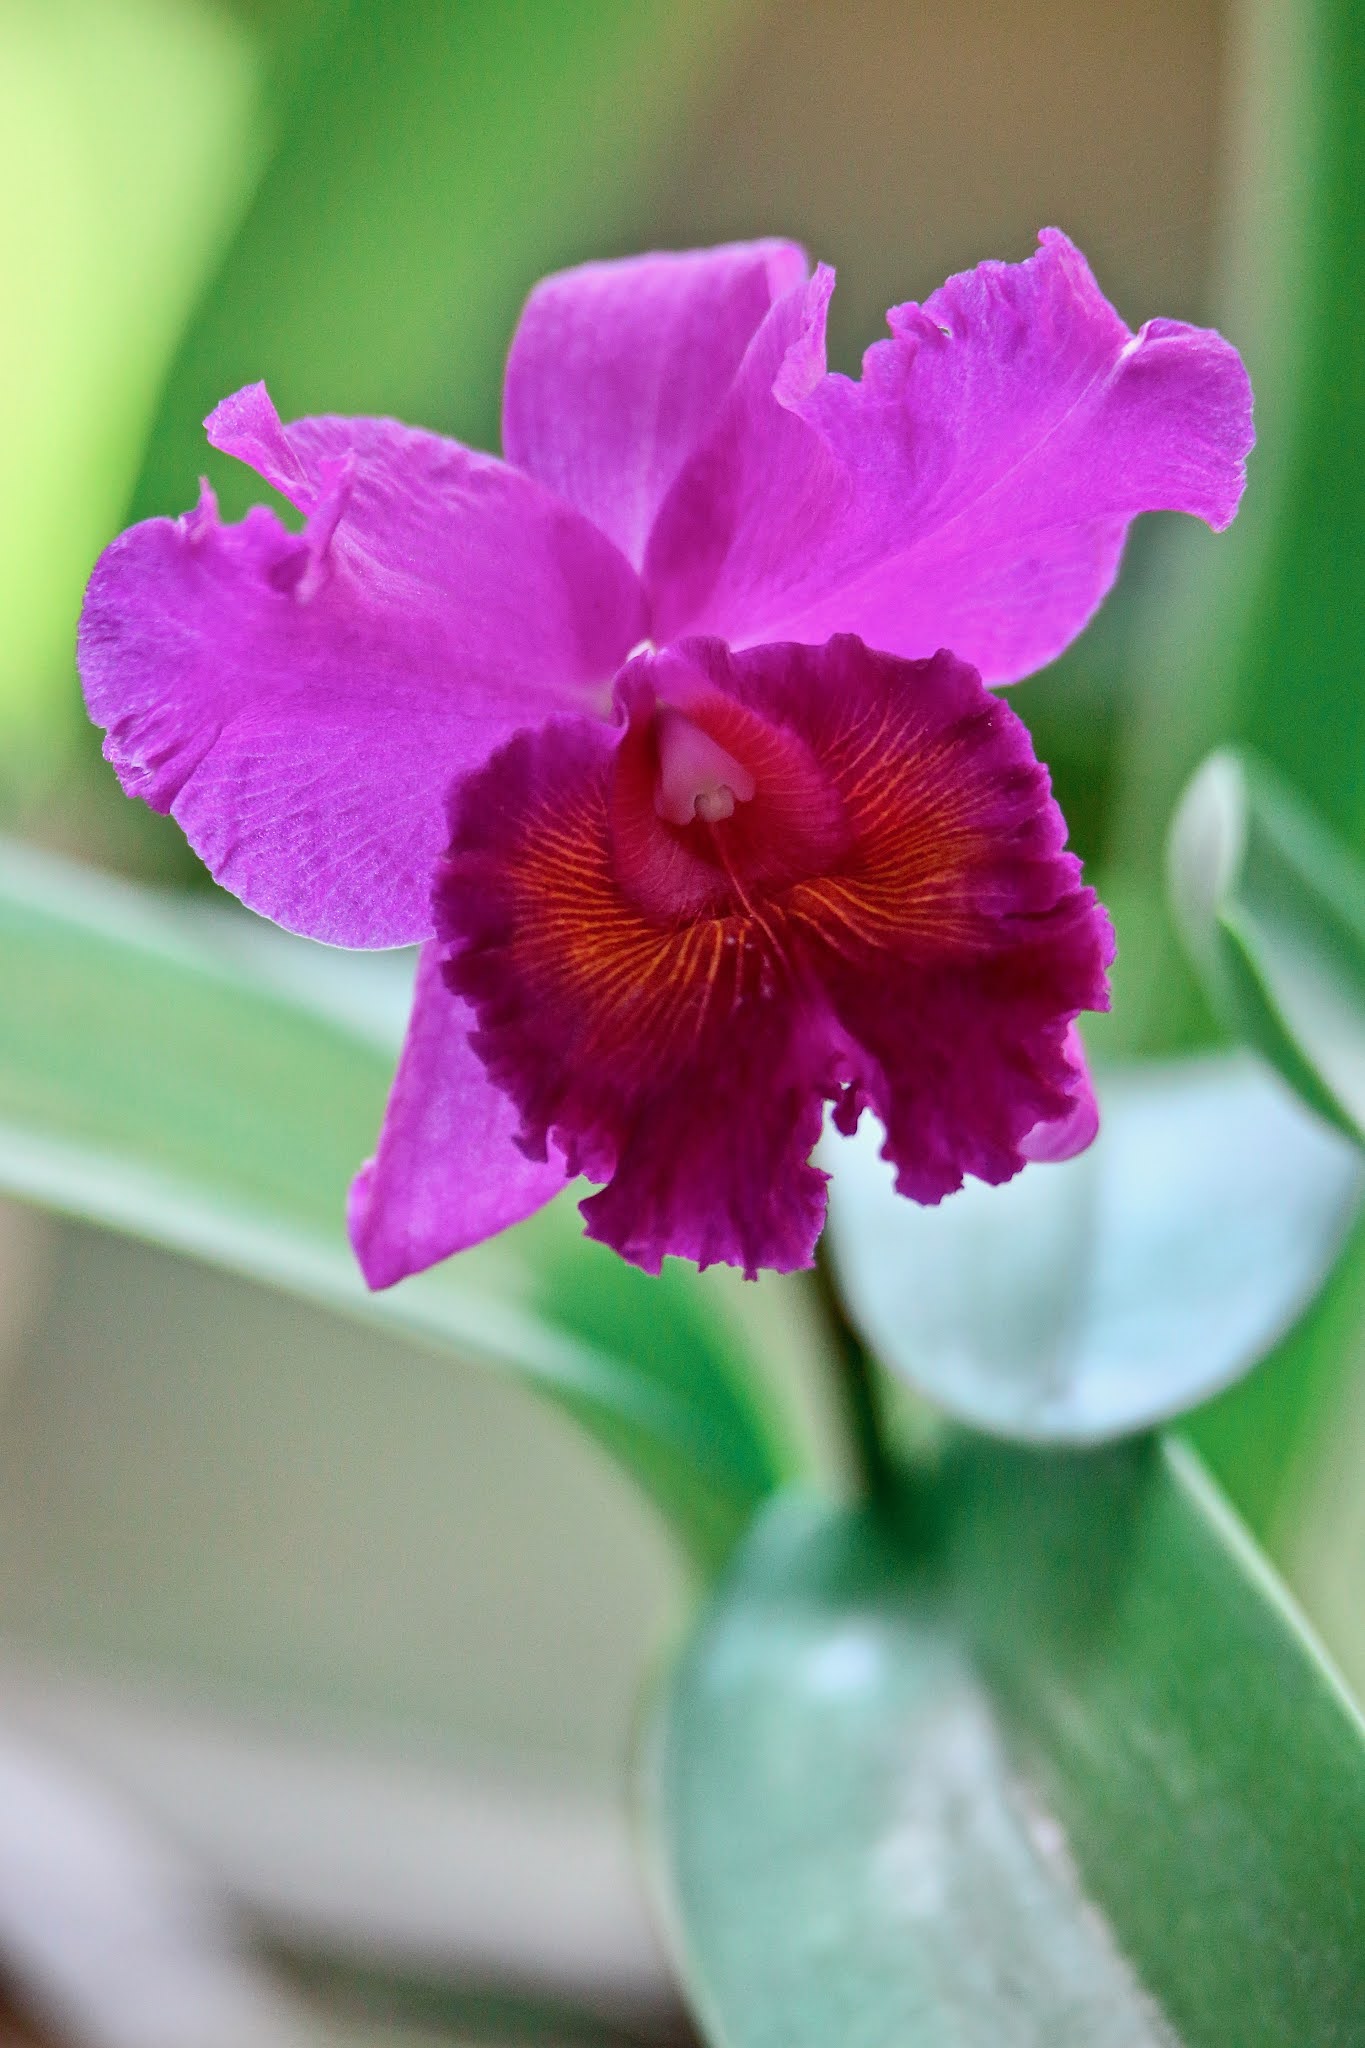 Common Orchids of India, high resolution images free